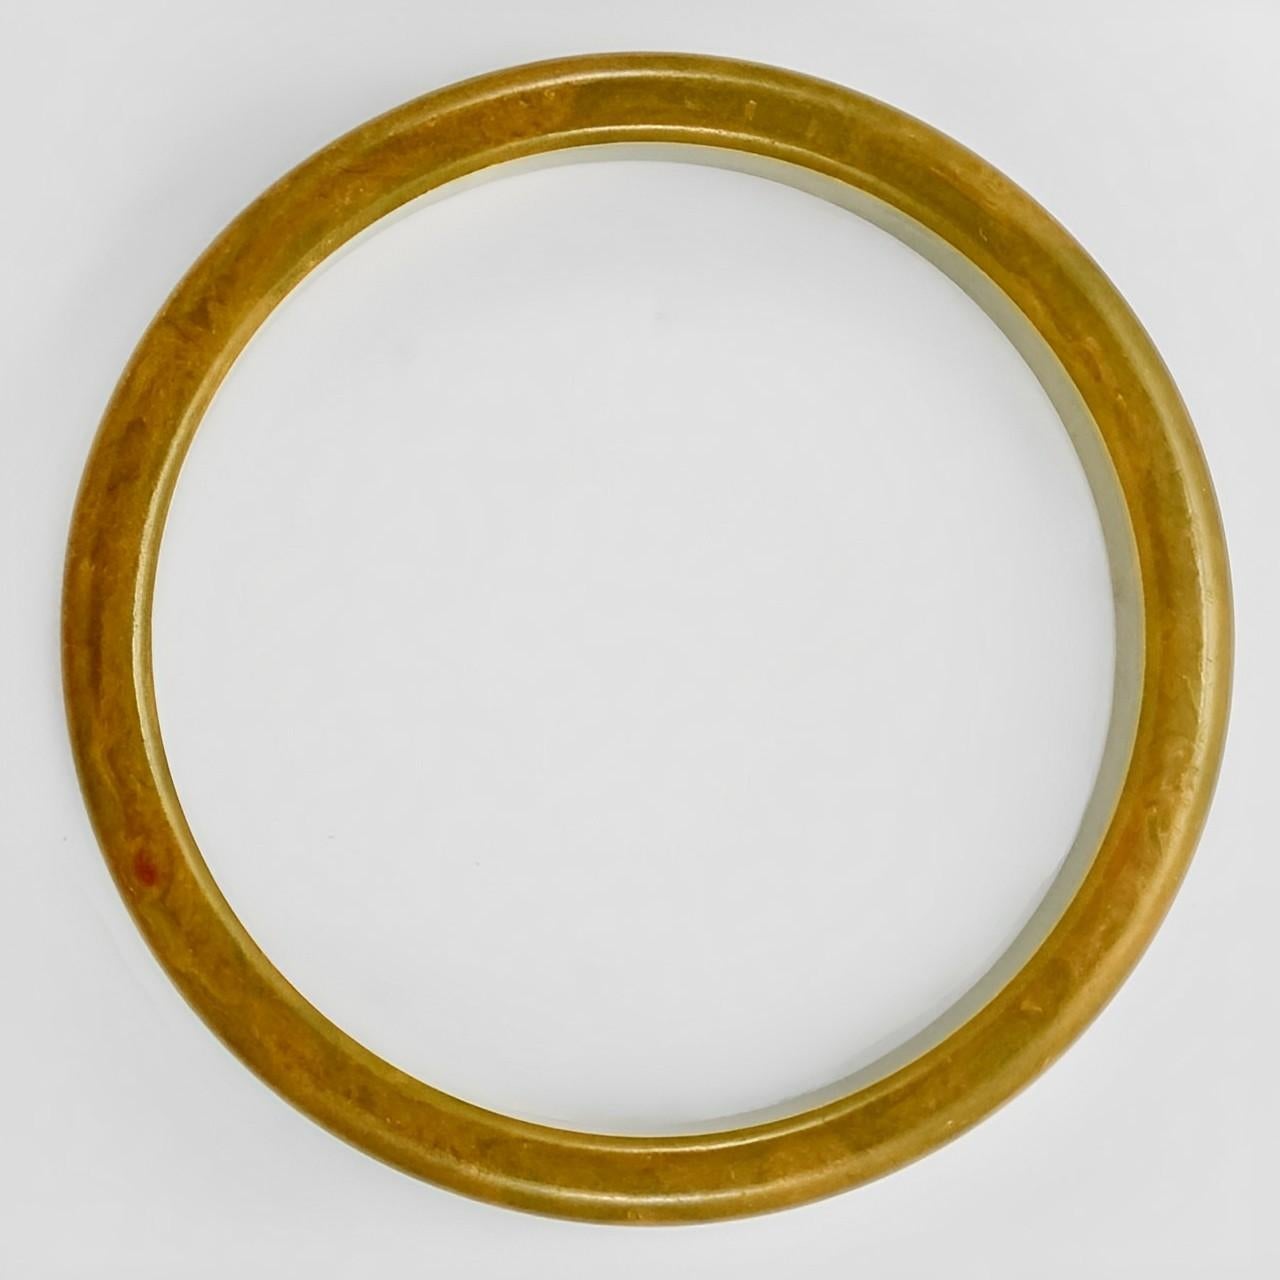 Wonderful marbled mustard yellow Bakelite bangle bracelet. Inside diameter 6.3 cm / 2.5 inches by width 1.3 cm / .5 inch. The bangle is in very good condition.

This is a beautiful vintage Bakelite bangle, circa 1930s.